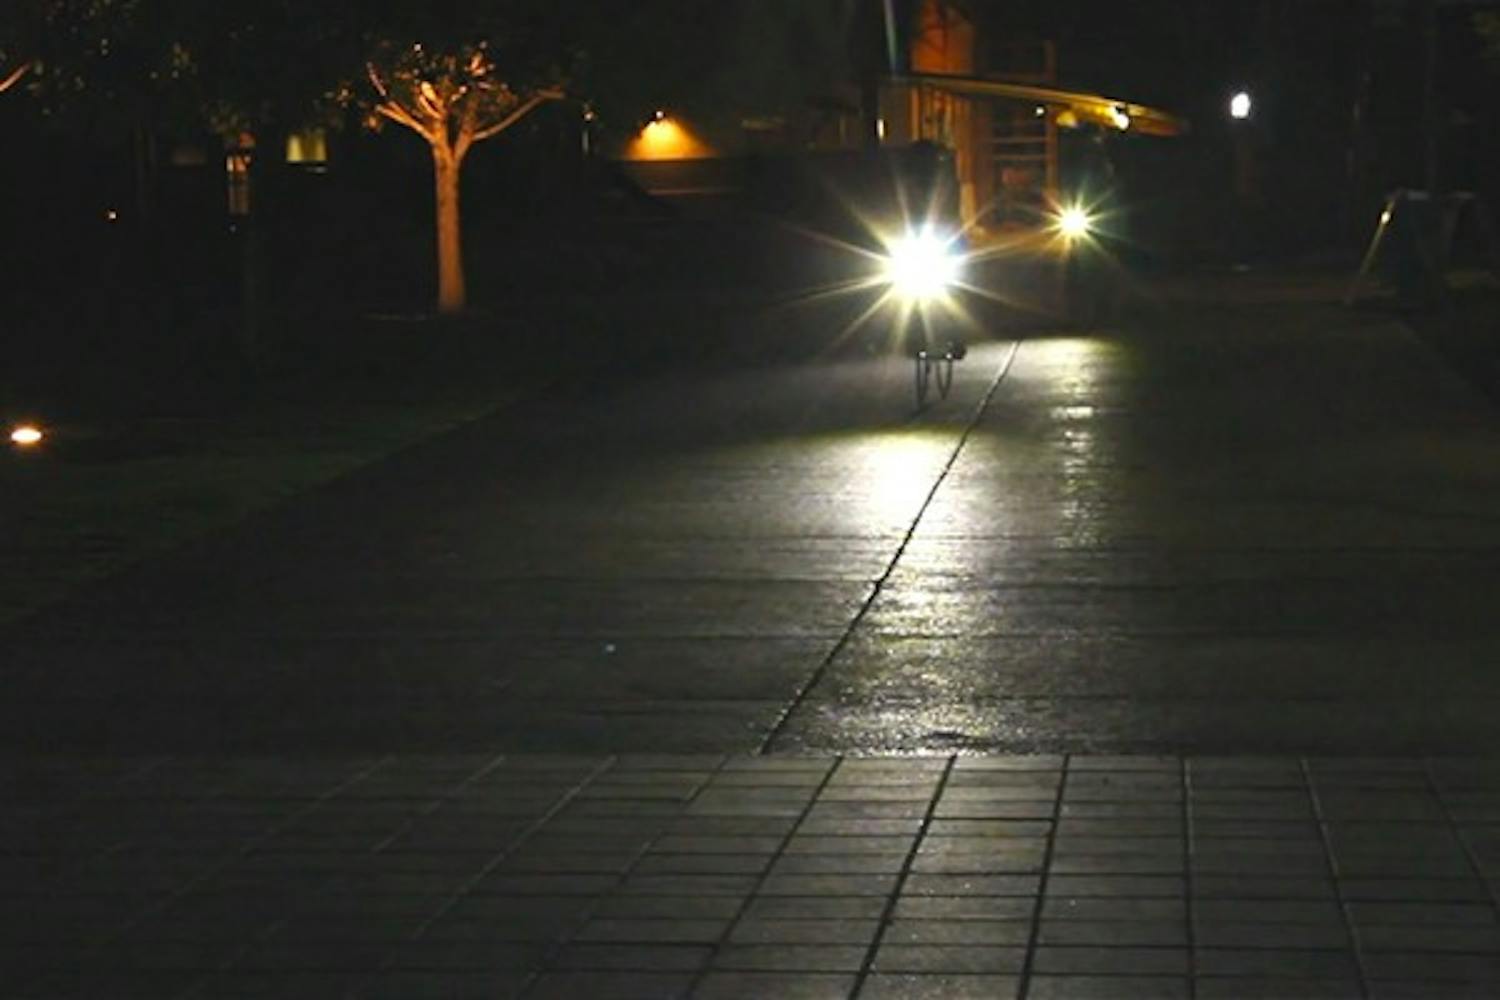 Once the loops begin, night falls on the cyclists. 
Shot from video by Sophia Thomas